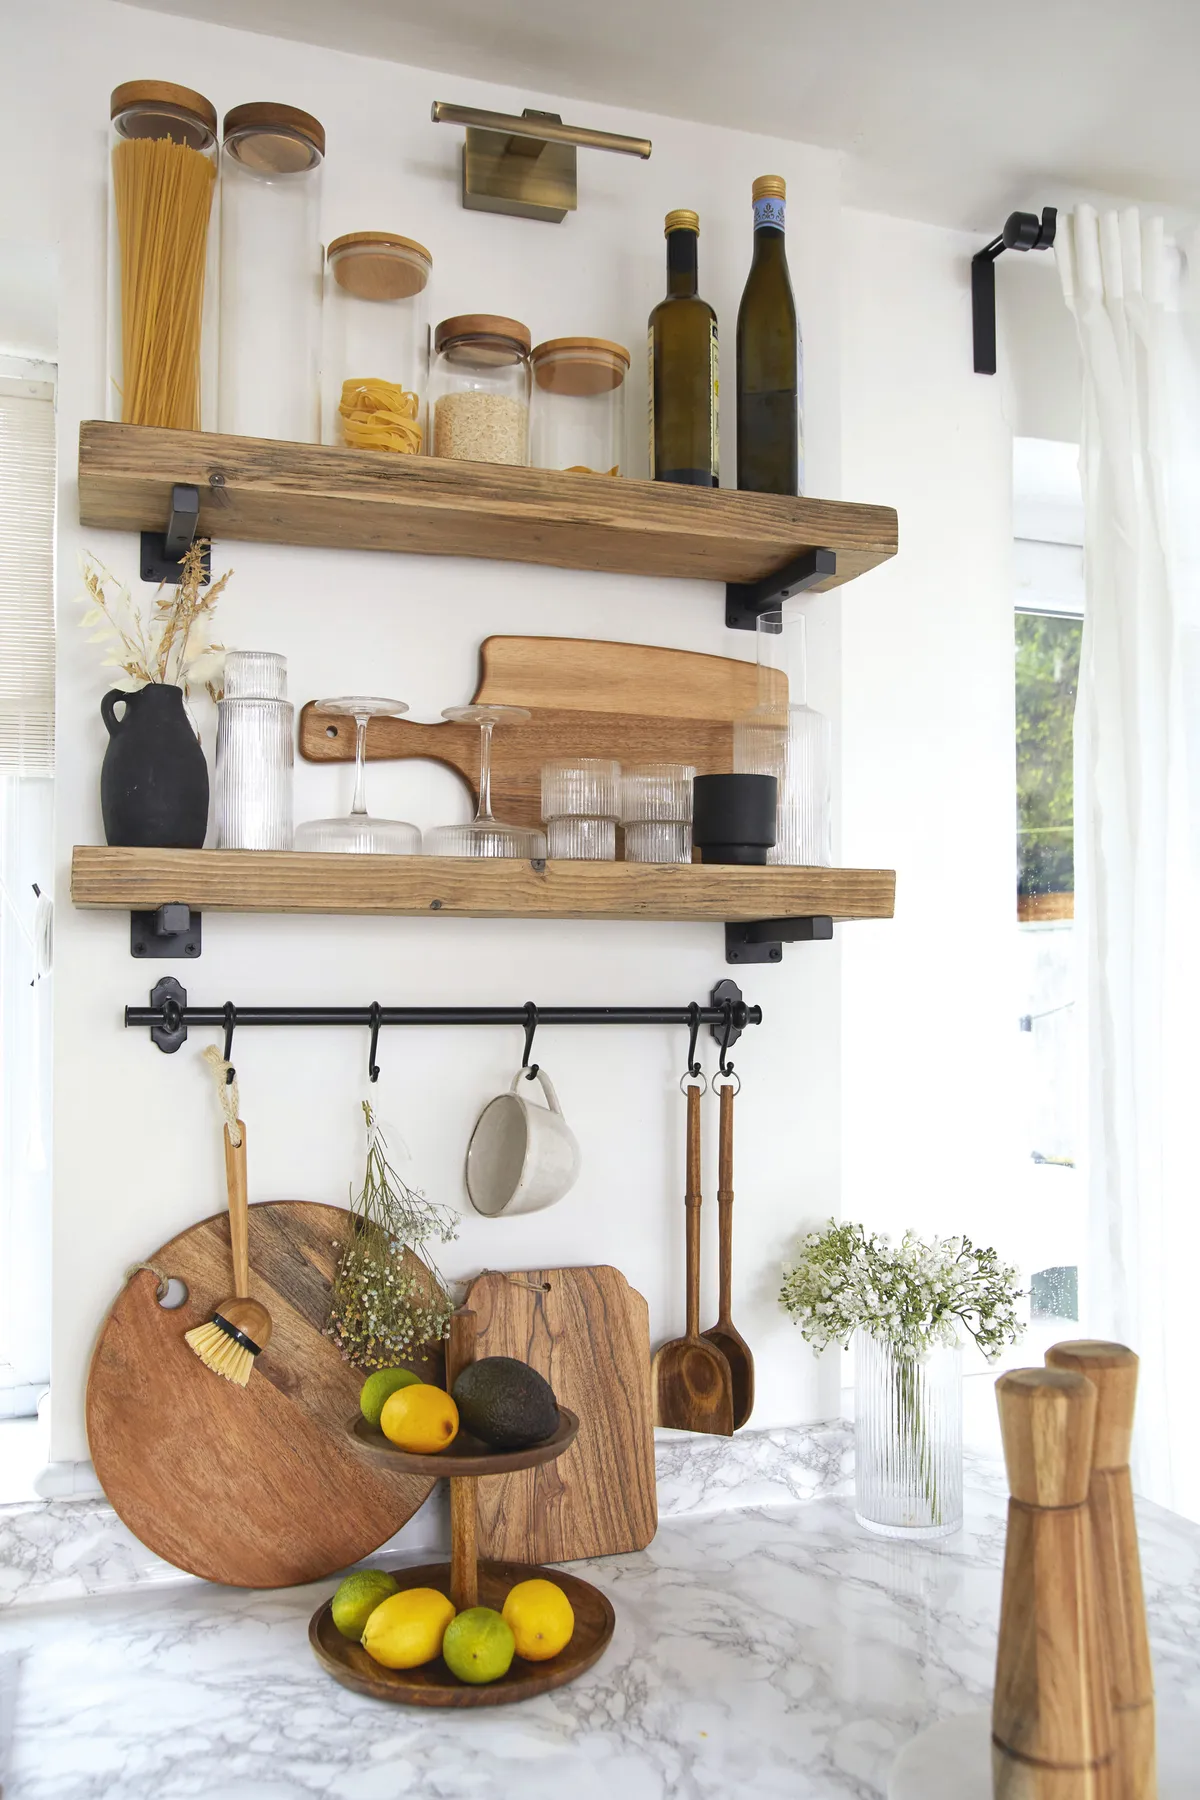 ‘Making your own scaffold shelves out of spare wood is so easy; you just need to invest in the tools. I cut them to size, sanded and varnished the wood and then hung them on brackets’